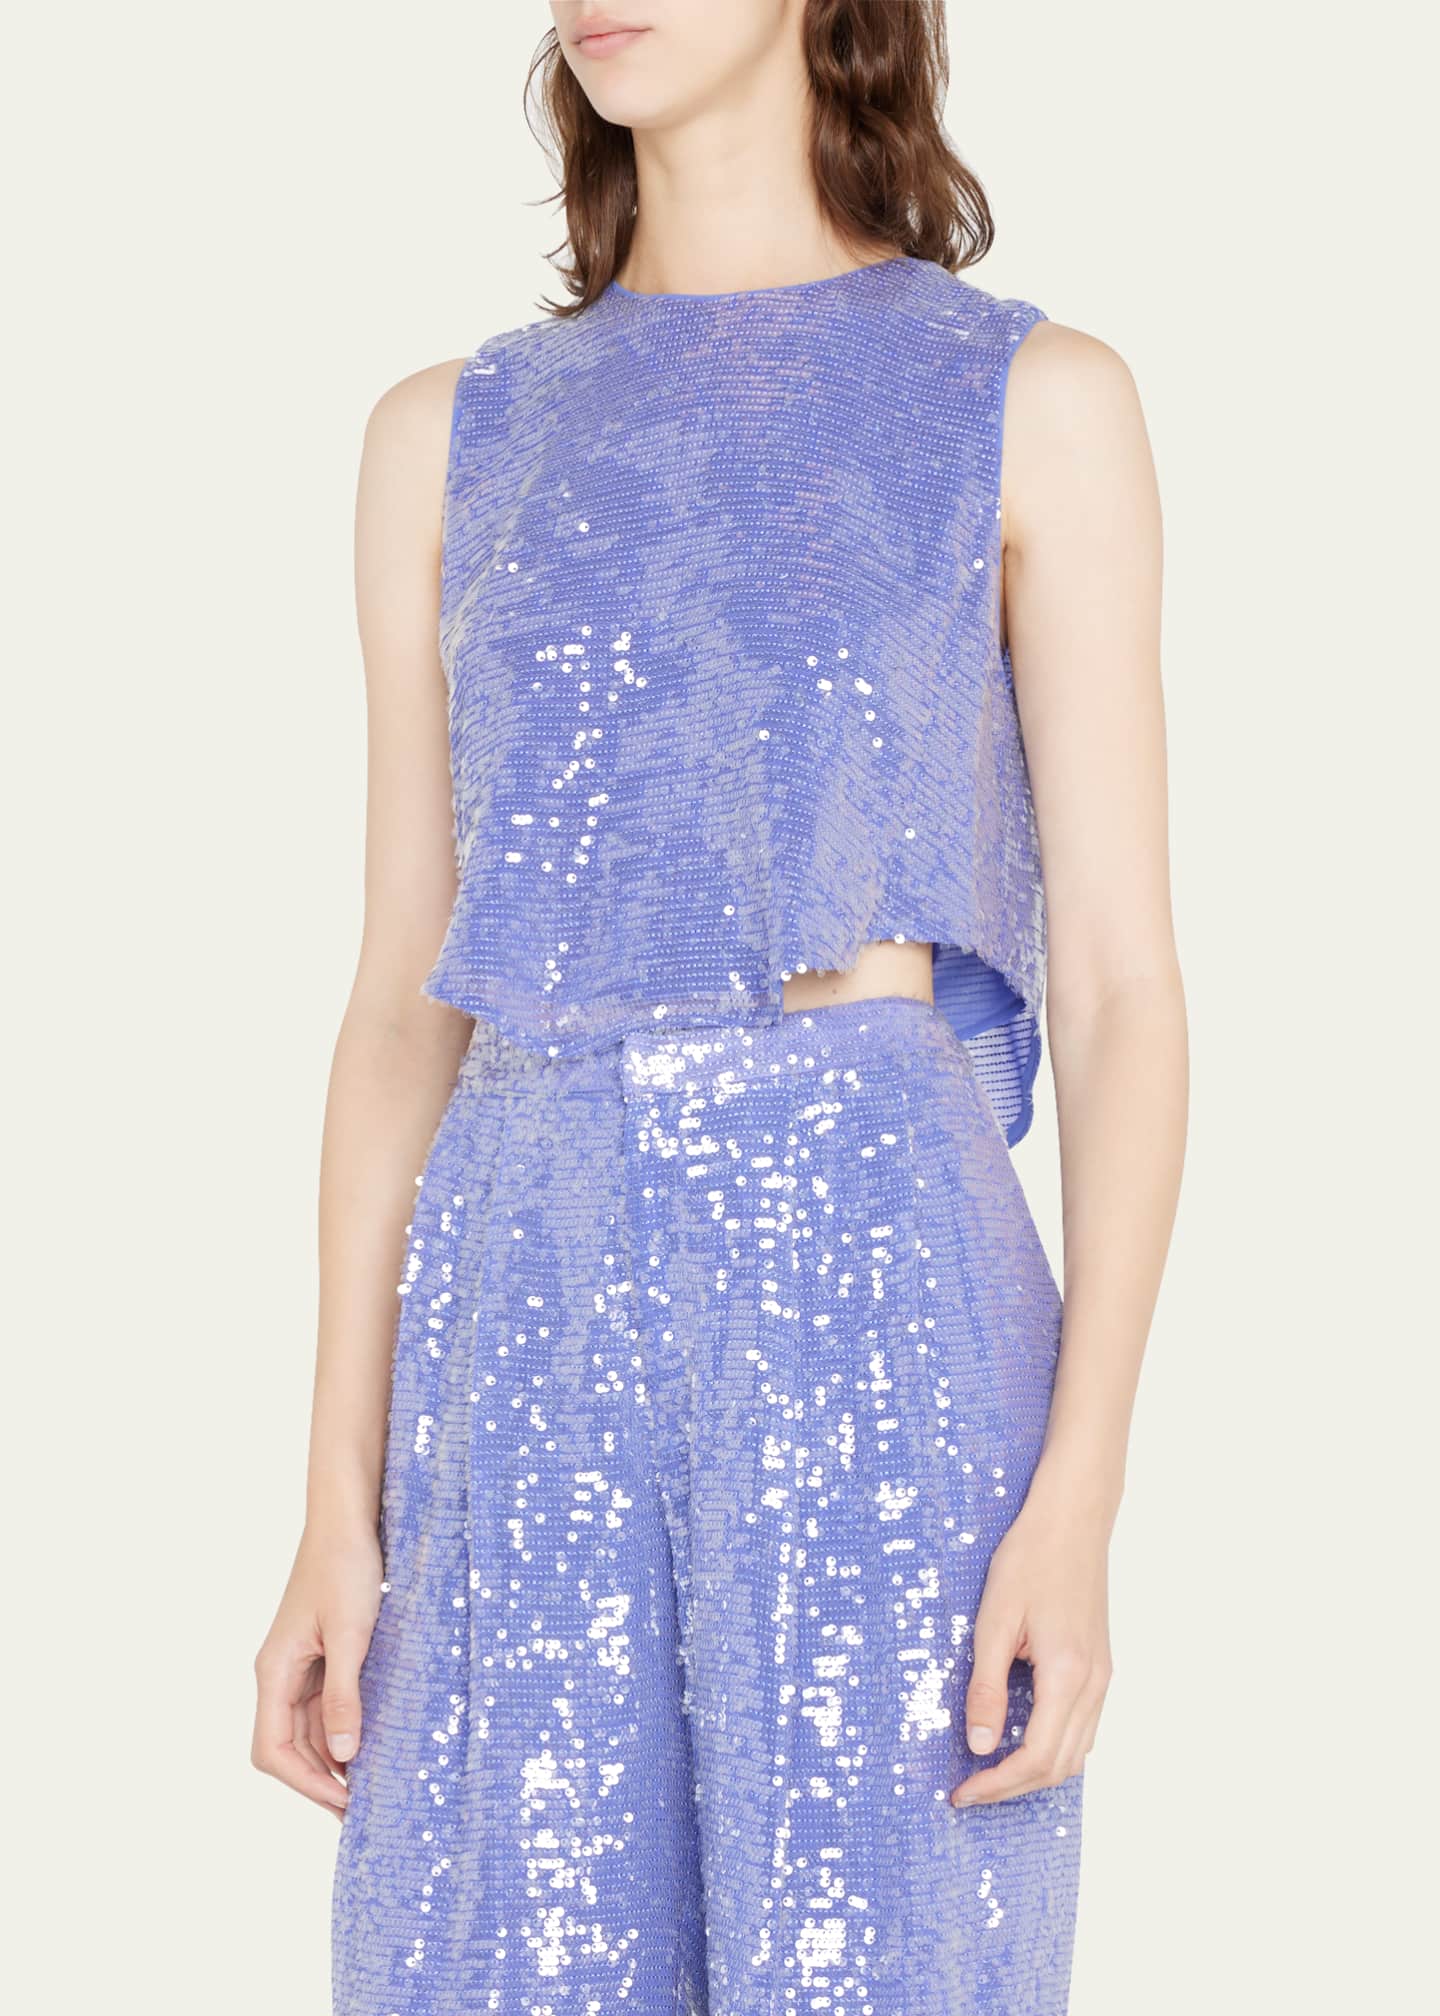 LAPOINTE Sequin Embroidered Crop Top - Bergdorf Goodman